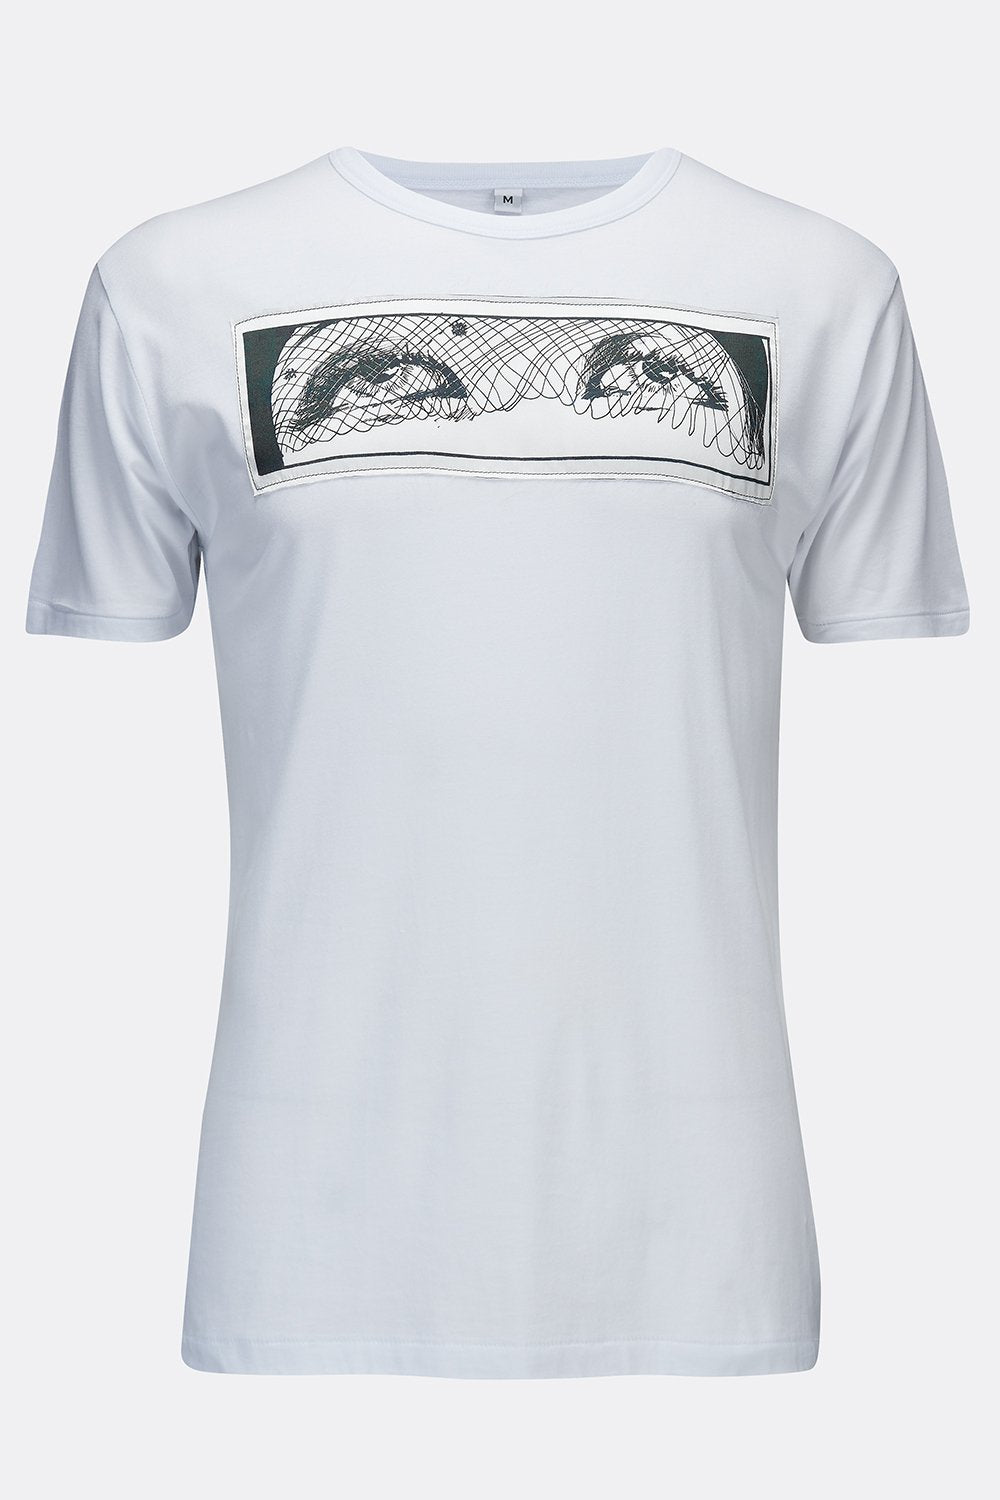 PEEPERS TEE SHIRT - WHITE-T shirts-A Child Of The Jago